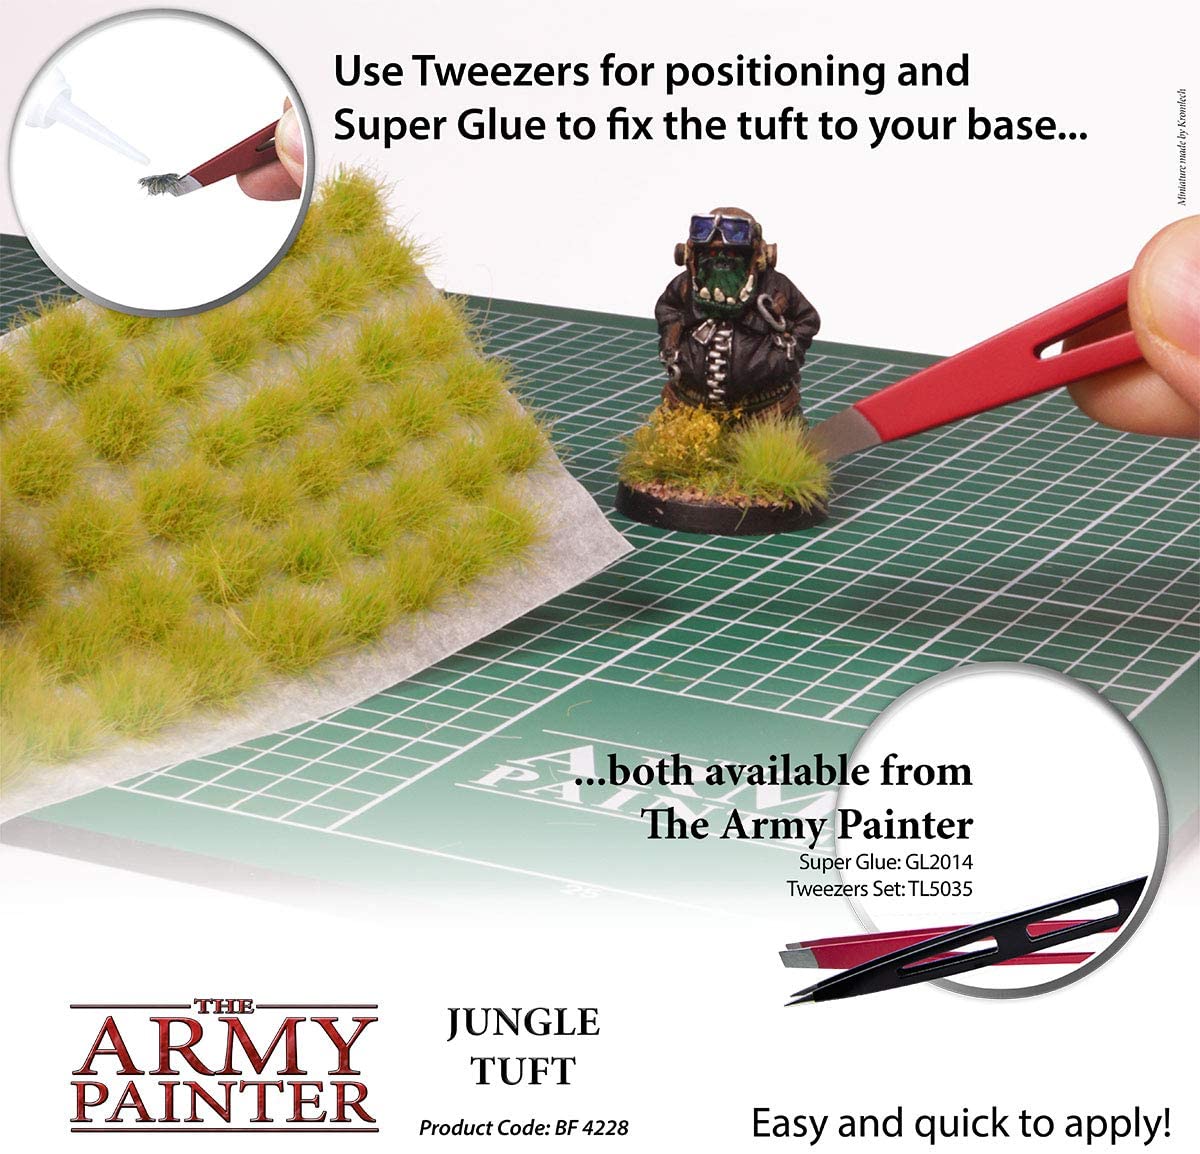 The Army Painter - Tufts: Jungle